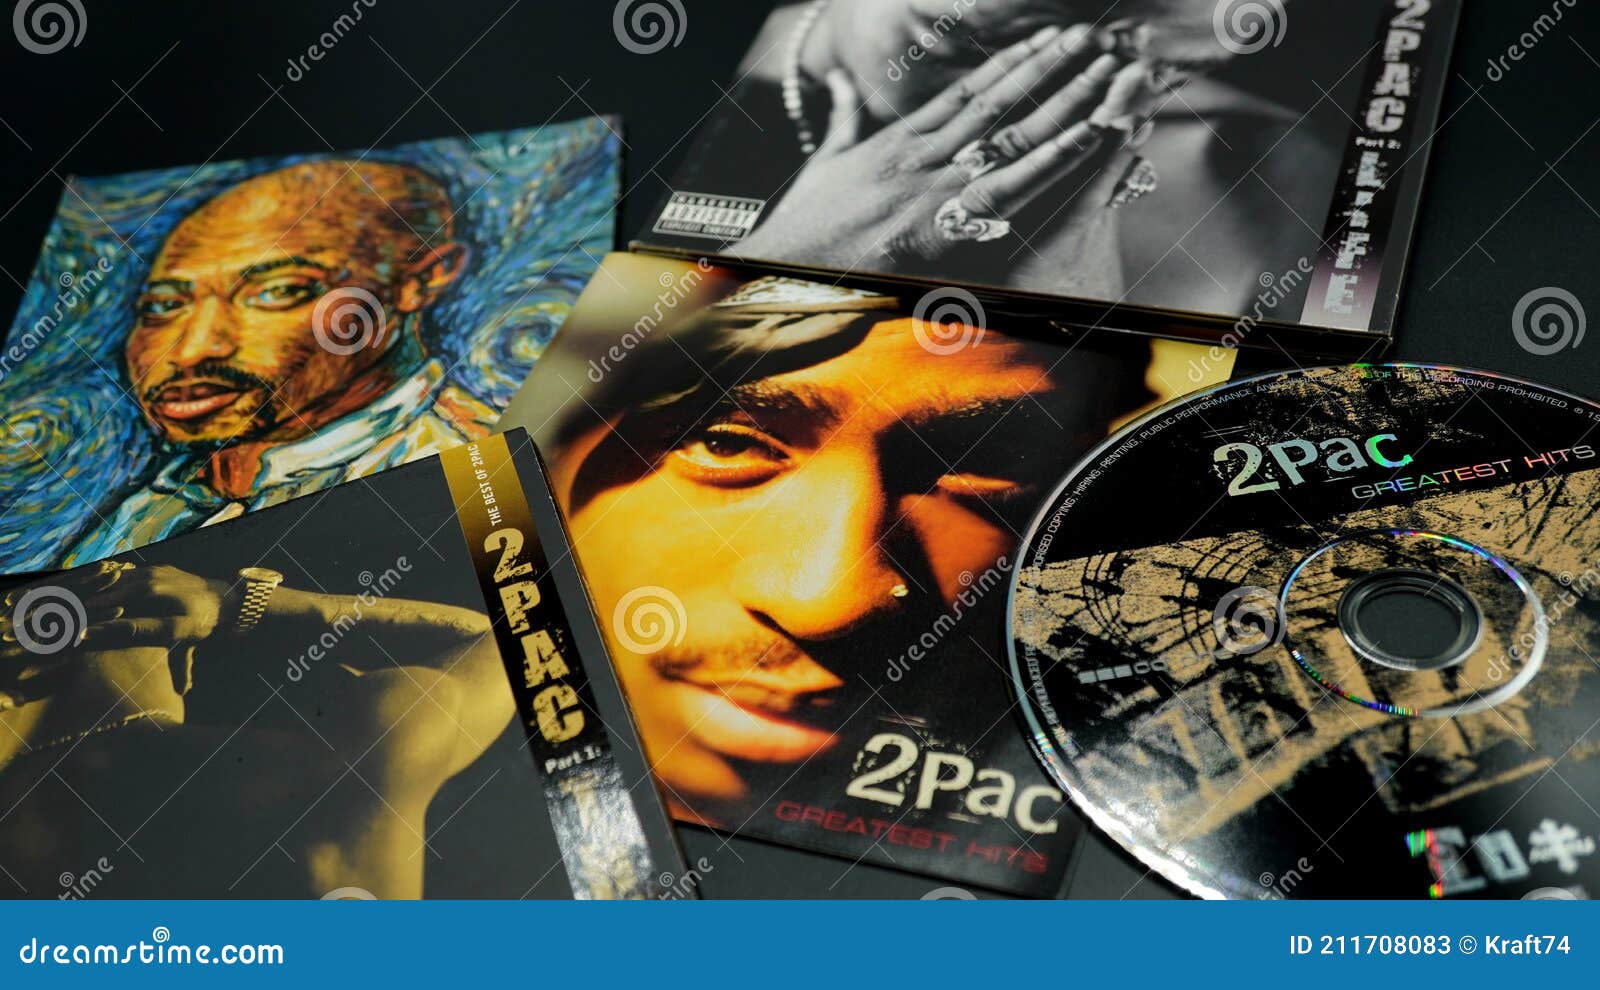 2pac greatest hits album download